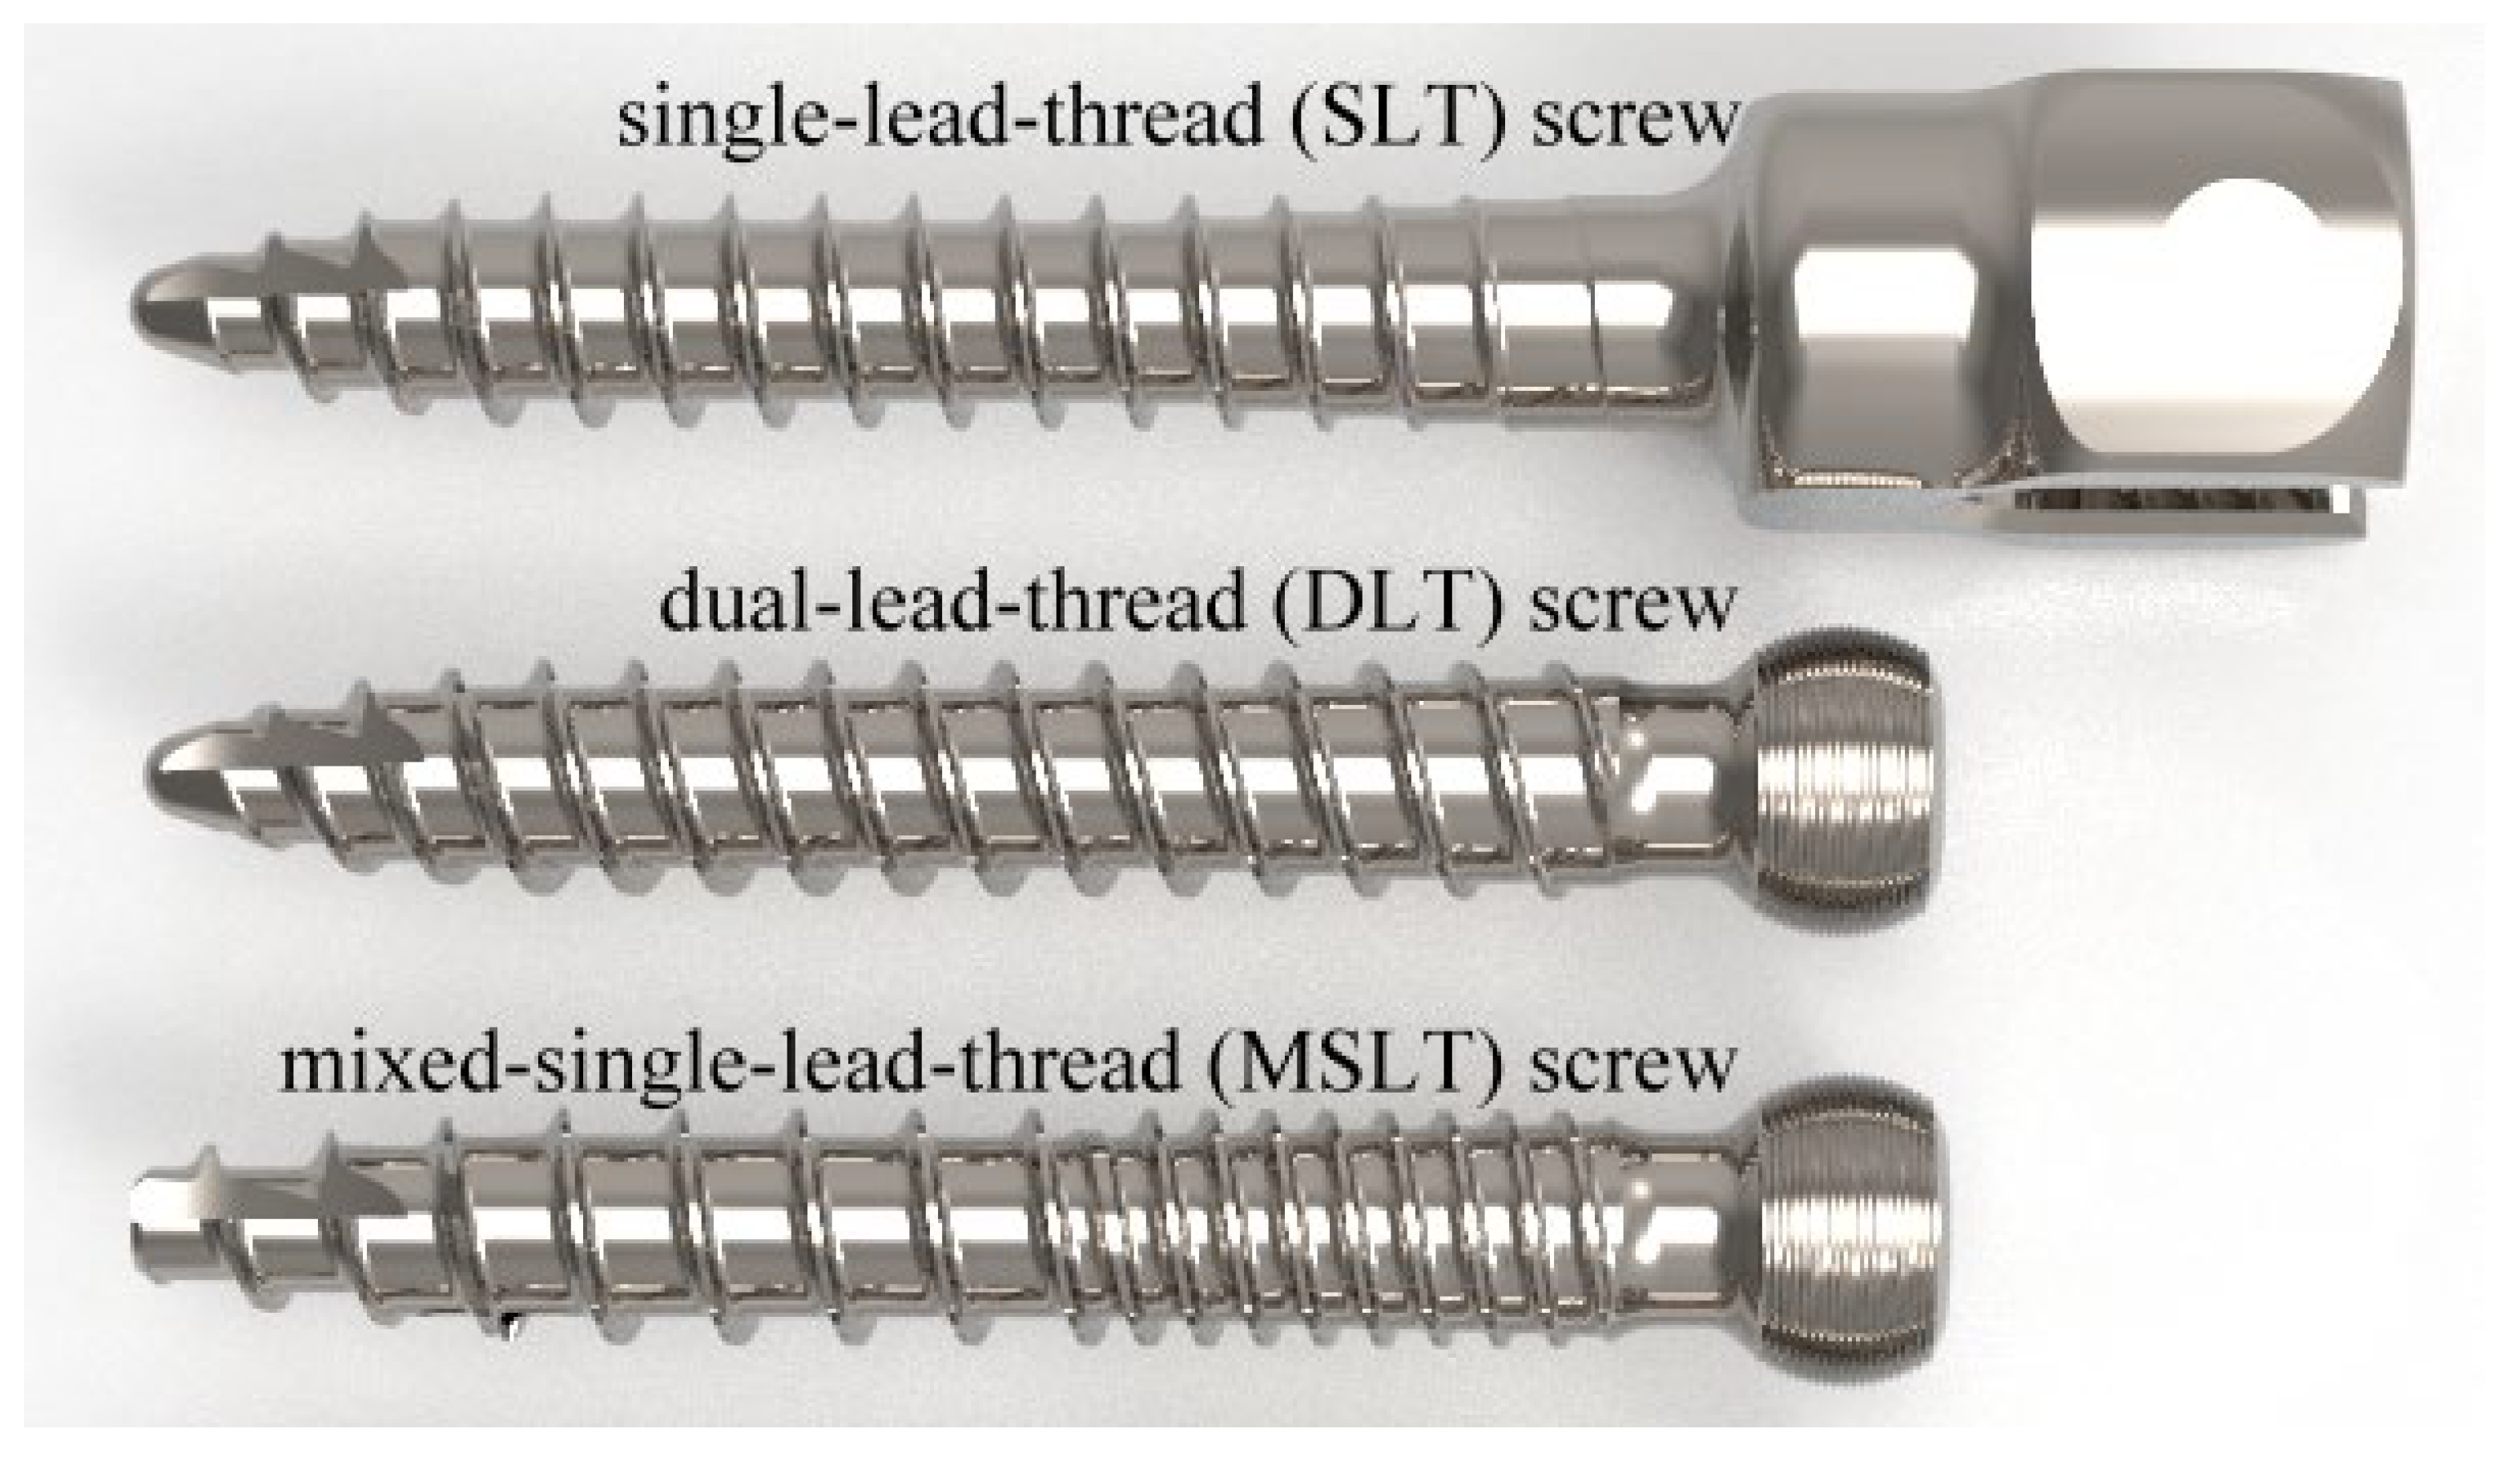 Lead Screw: What Is It? How Is It Used? Types, Threads